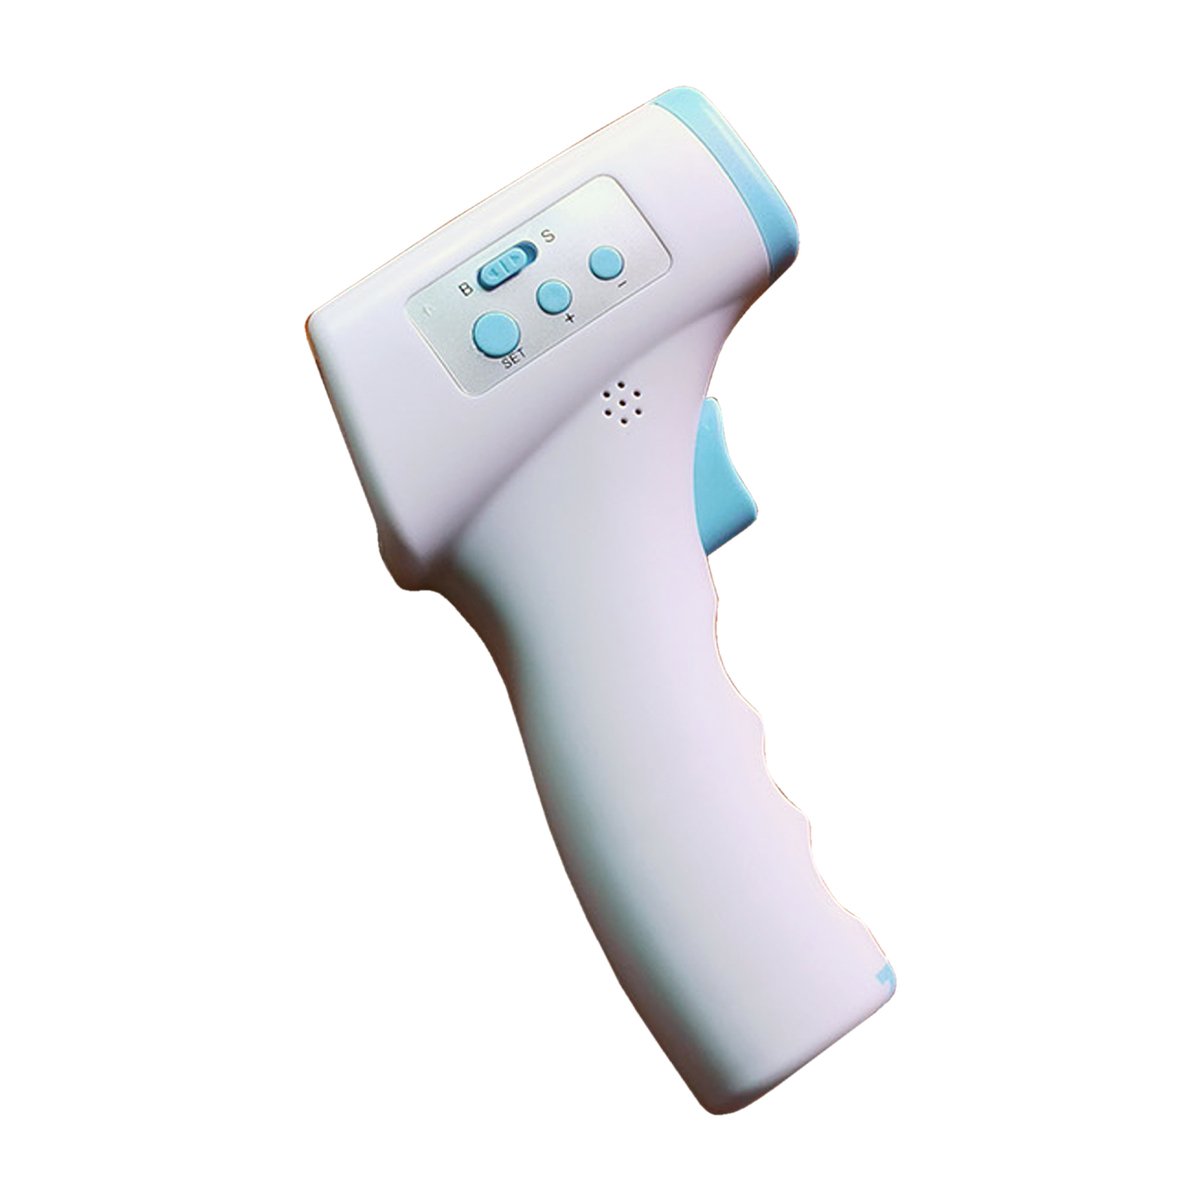 Infrared Thermometer FY-02